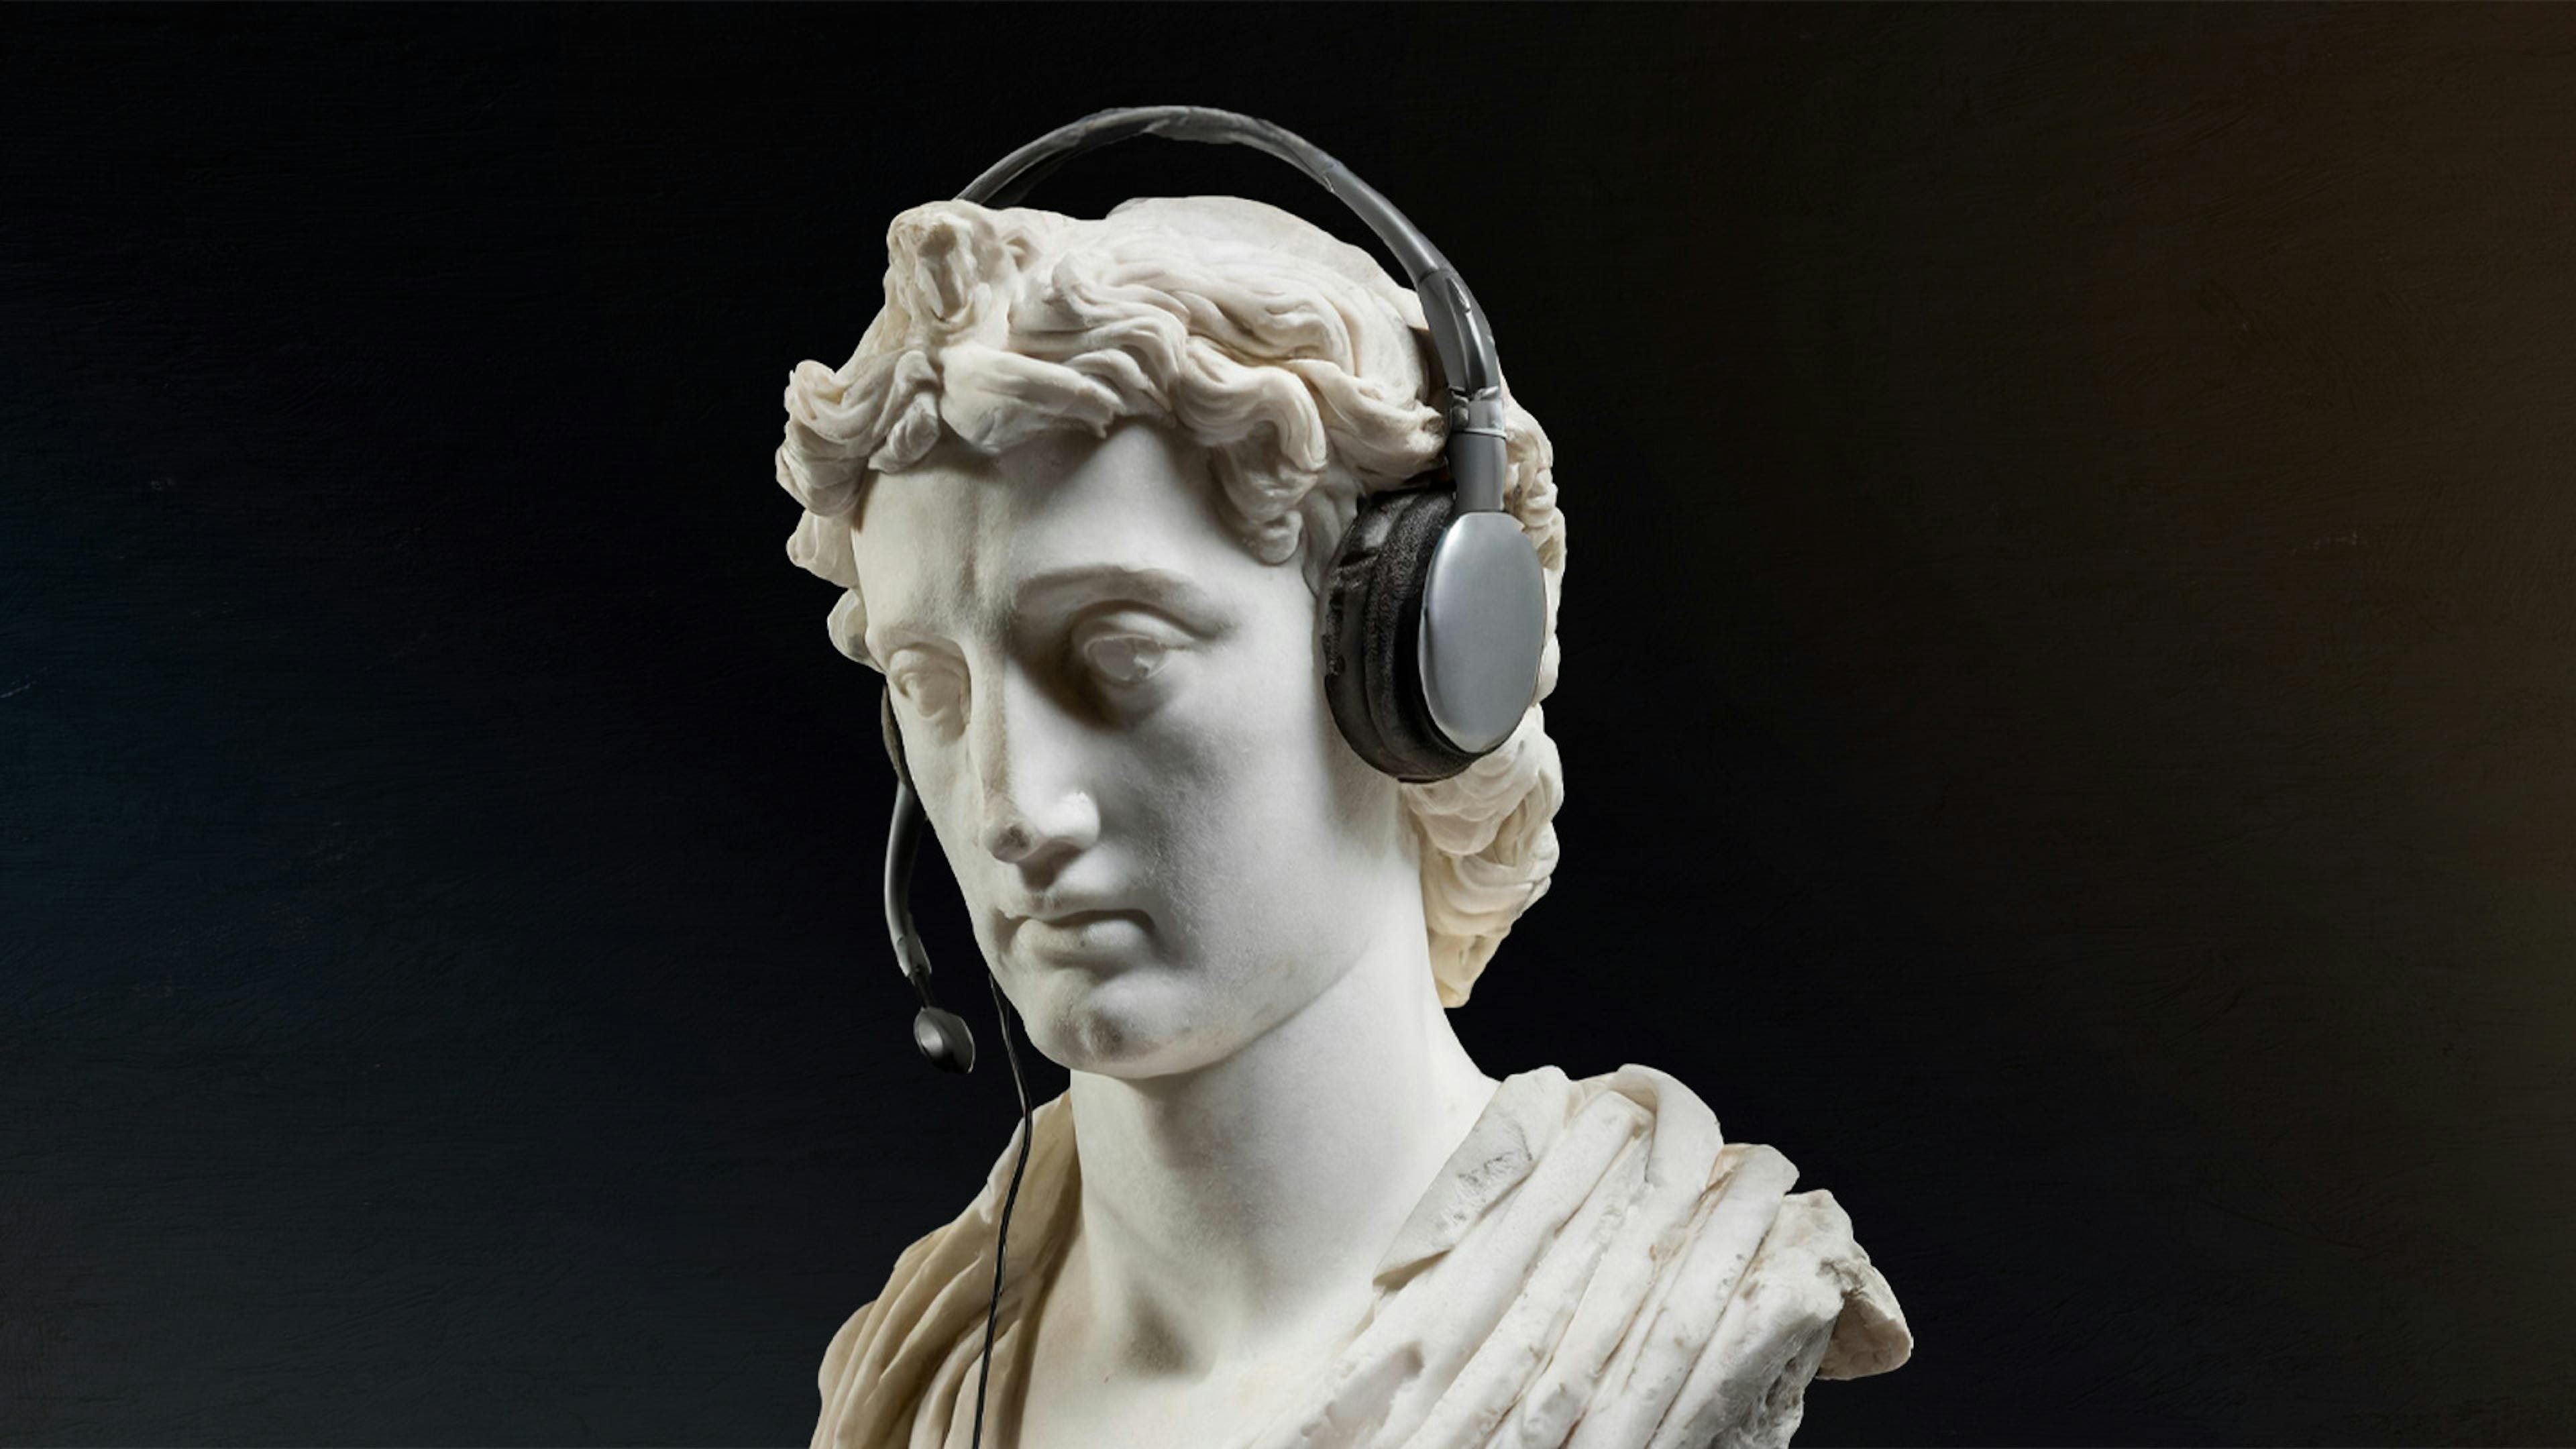 Roman statue with headset on